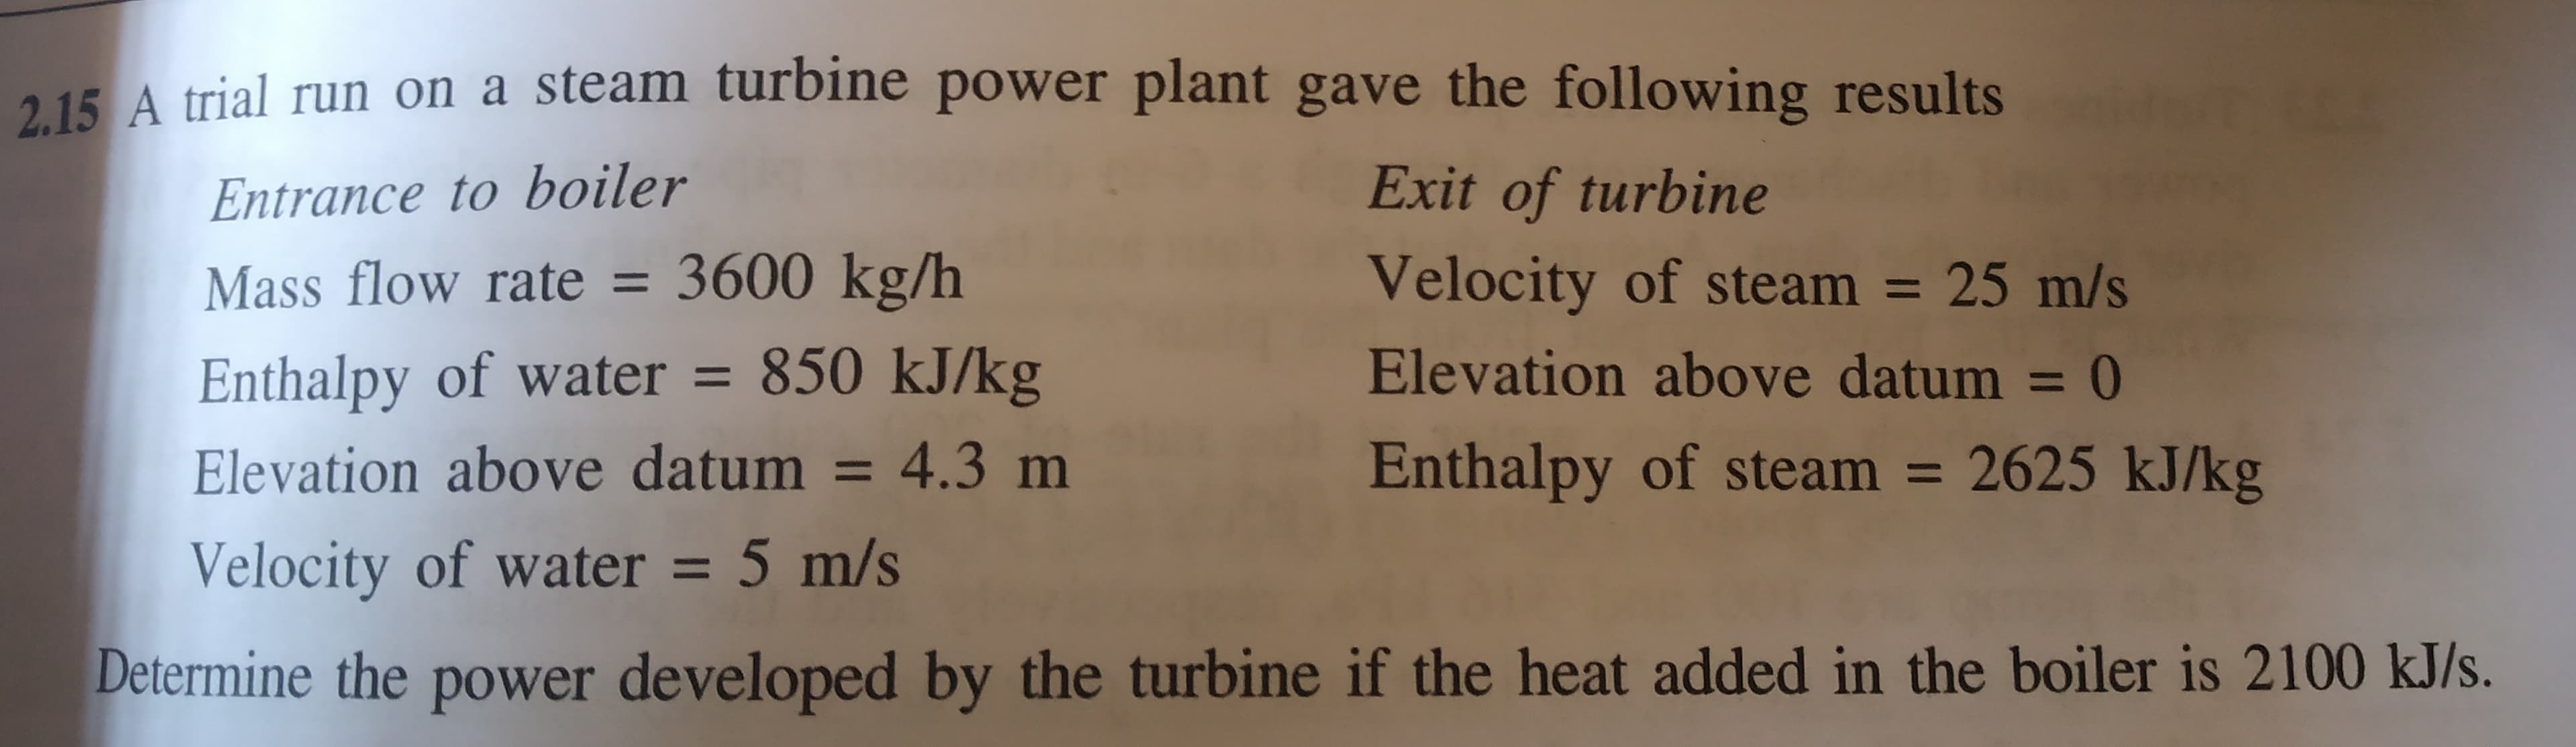 A trial run on a steam turbine power plant gave the following results
Entrance to boiler
Mass flow rate = 3600 kg/h
Exit of turbine
Velocity of steam = 25 m/s
%3D
Enthalpy of water = 850 kJ/kg
Elevation above datum = 4.3 m
Elevation above datum = 0
%3D
Enthalpy of steam = 2625 kJ/kg
%3D
%3D
Velocity of water = 5 m/s
%3D
Determine the power developed by the turbine if the heat added in the boiler is 2100 kJ/s.
